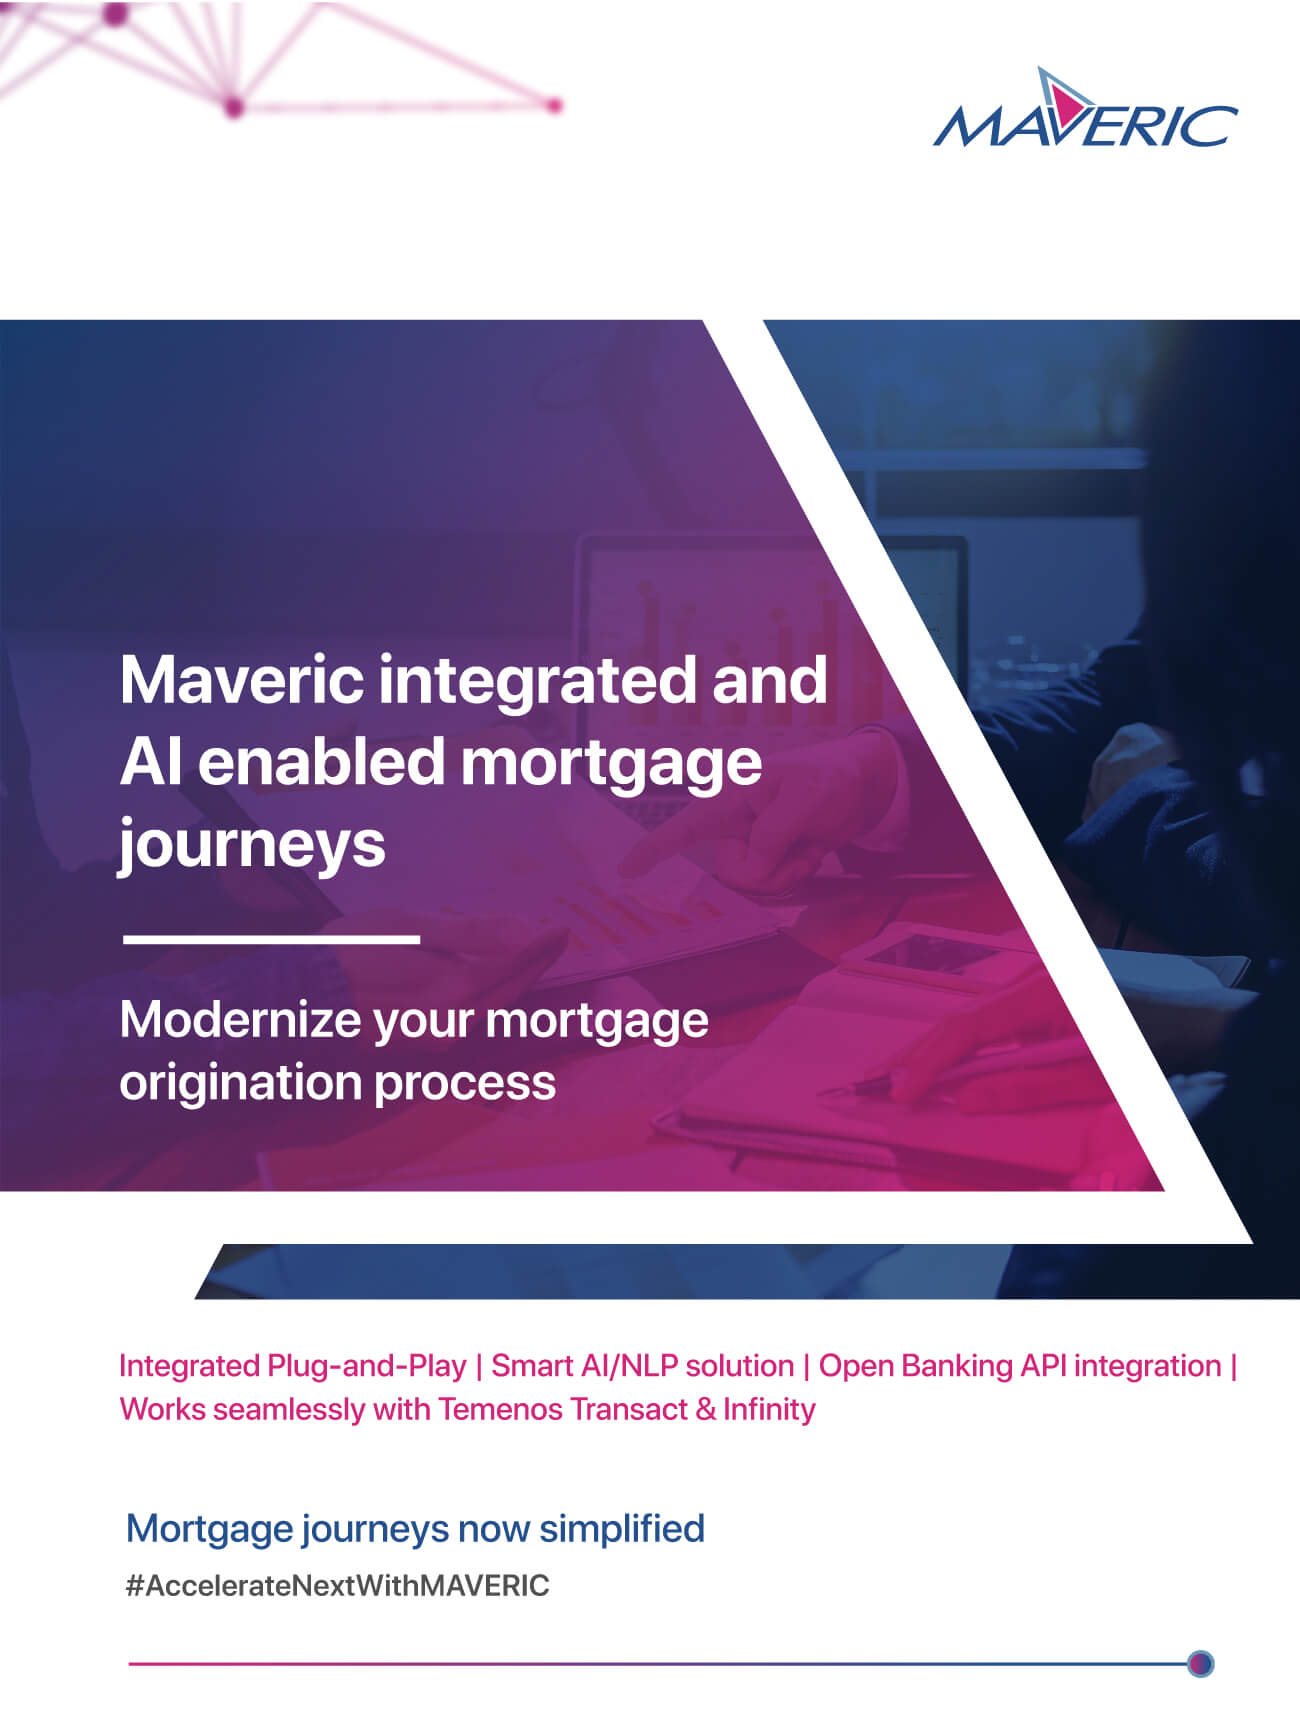 Maveric integrated and AI enabled mortgage journeys